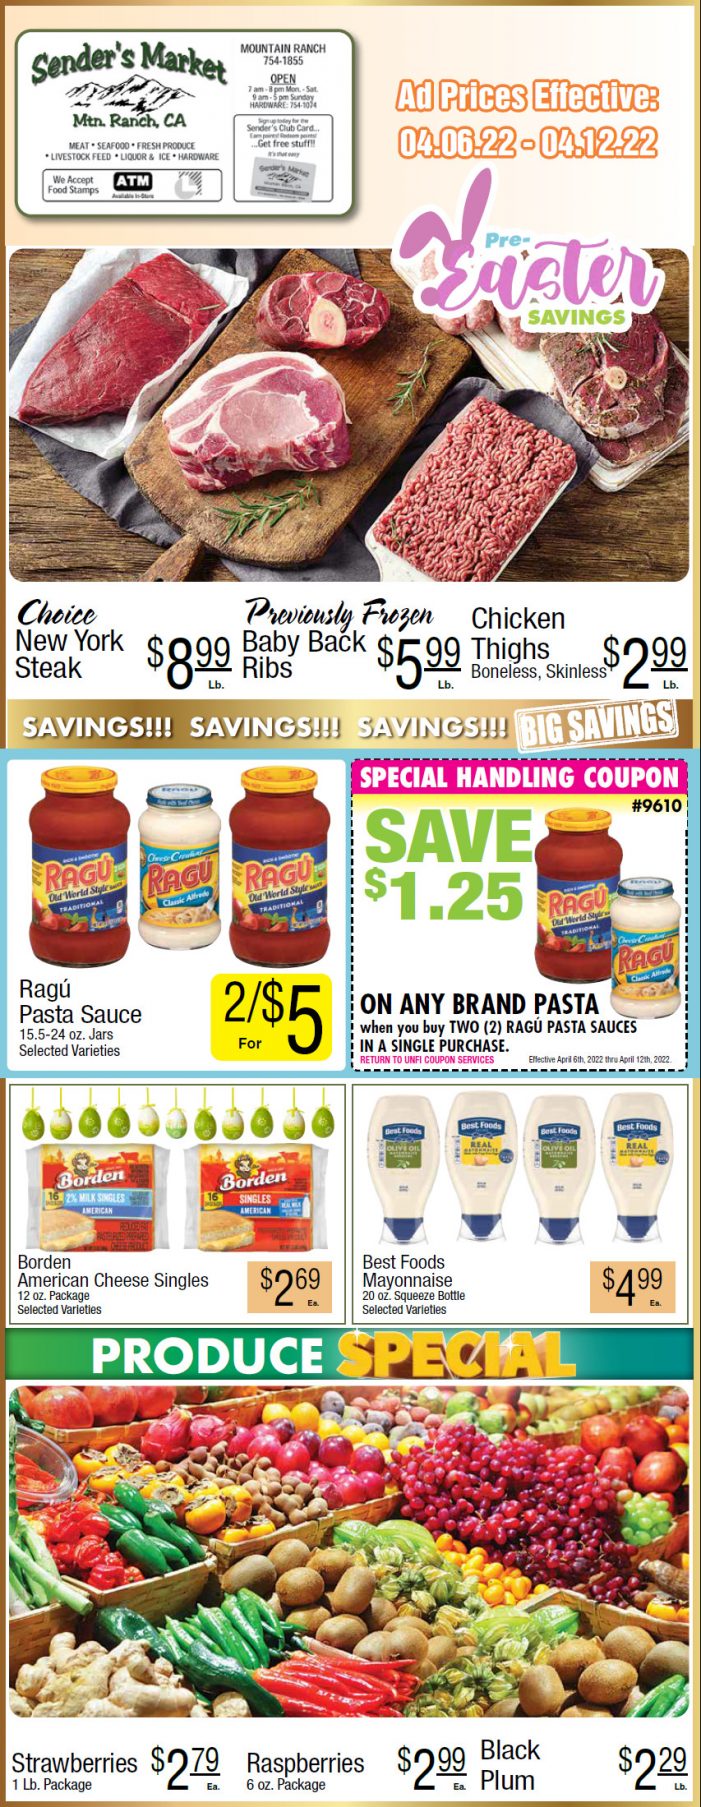 Sender’s Market’s Weekly Ad & Grocery Specials  April 6th ~ April 12th! Shop Local & Save!